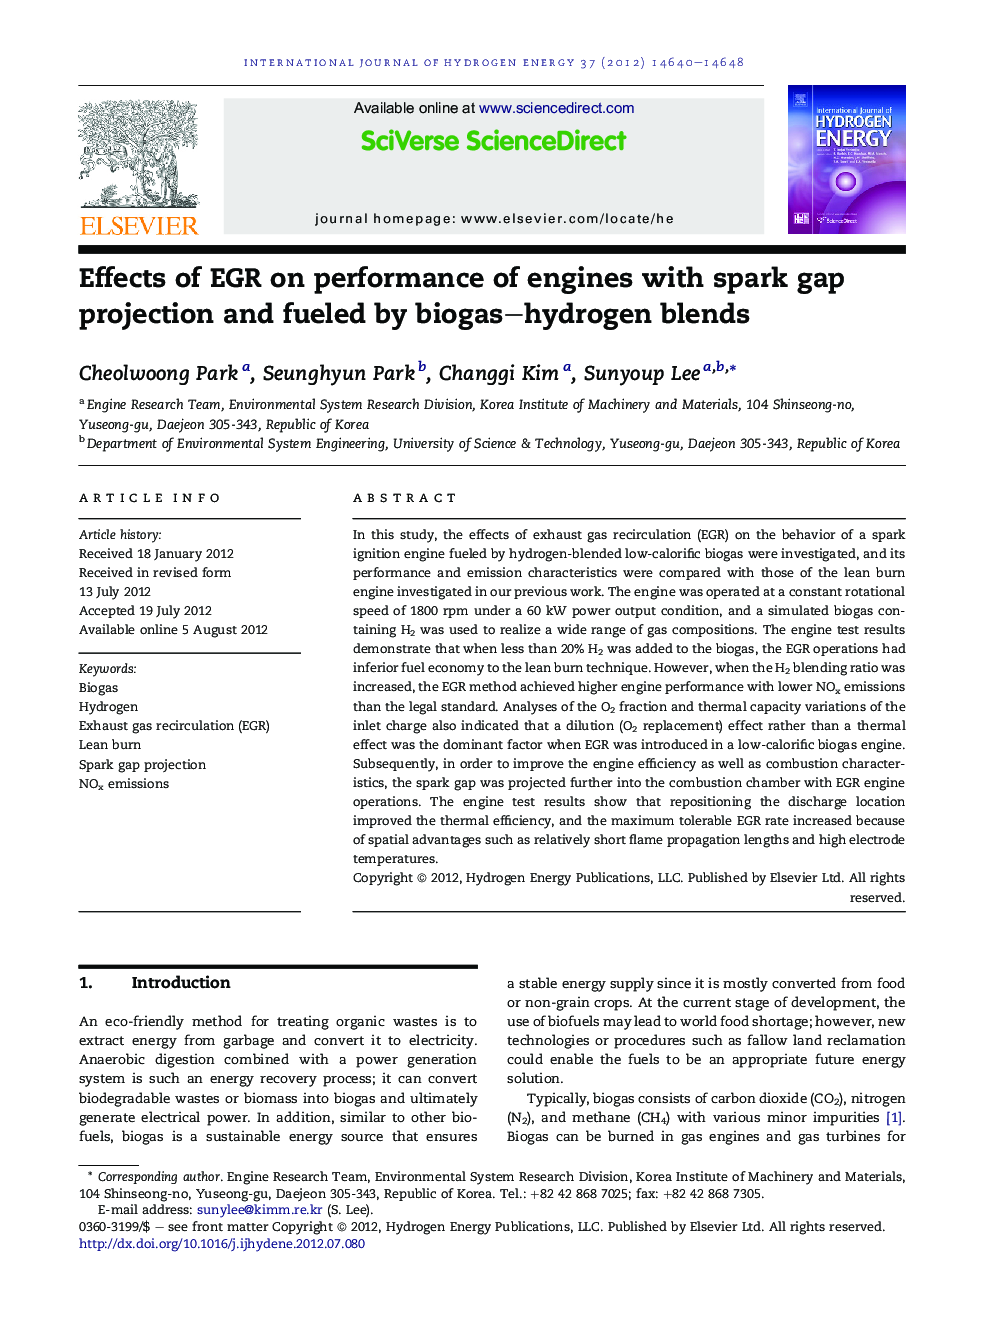 Effects of EGR on performance of engines with spark gap projection and fueled by biogas–hydrogen blends